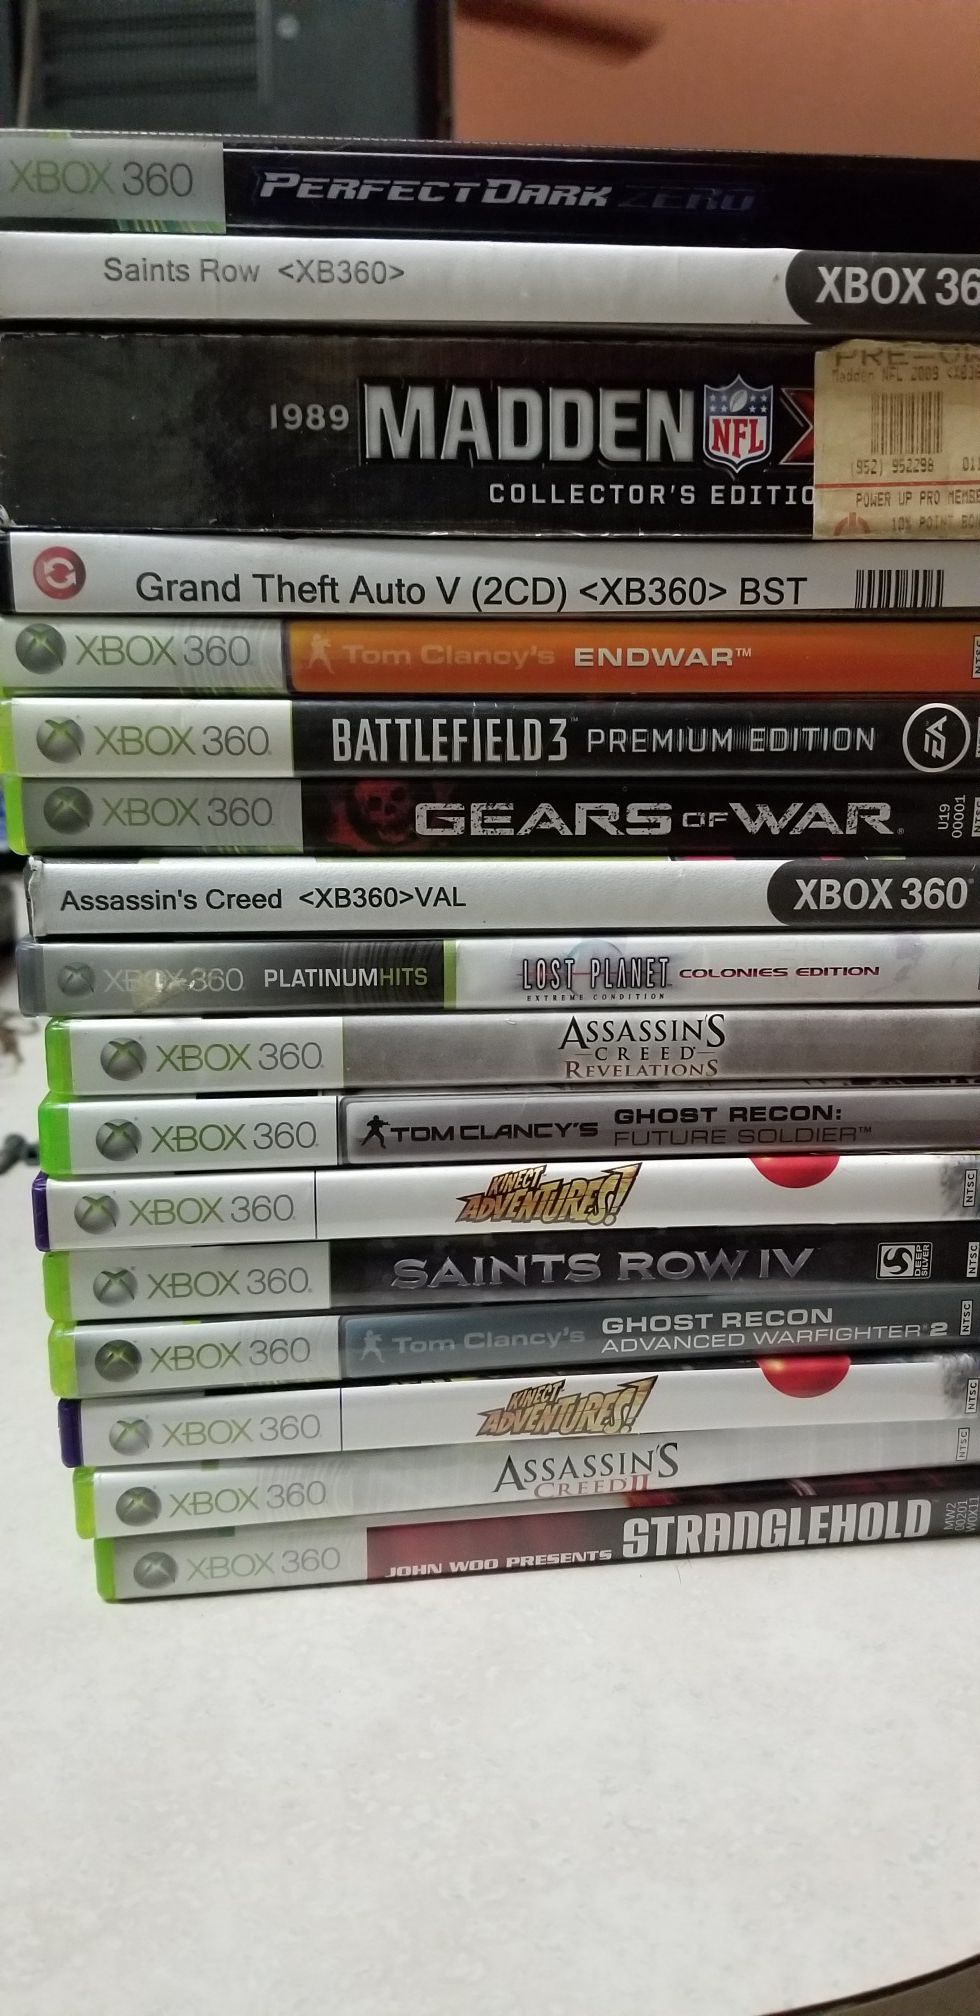 Xbox games and magazines with cheat codes